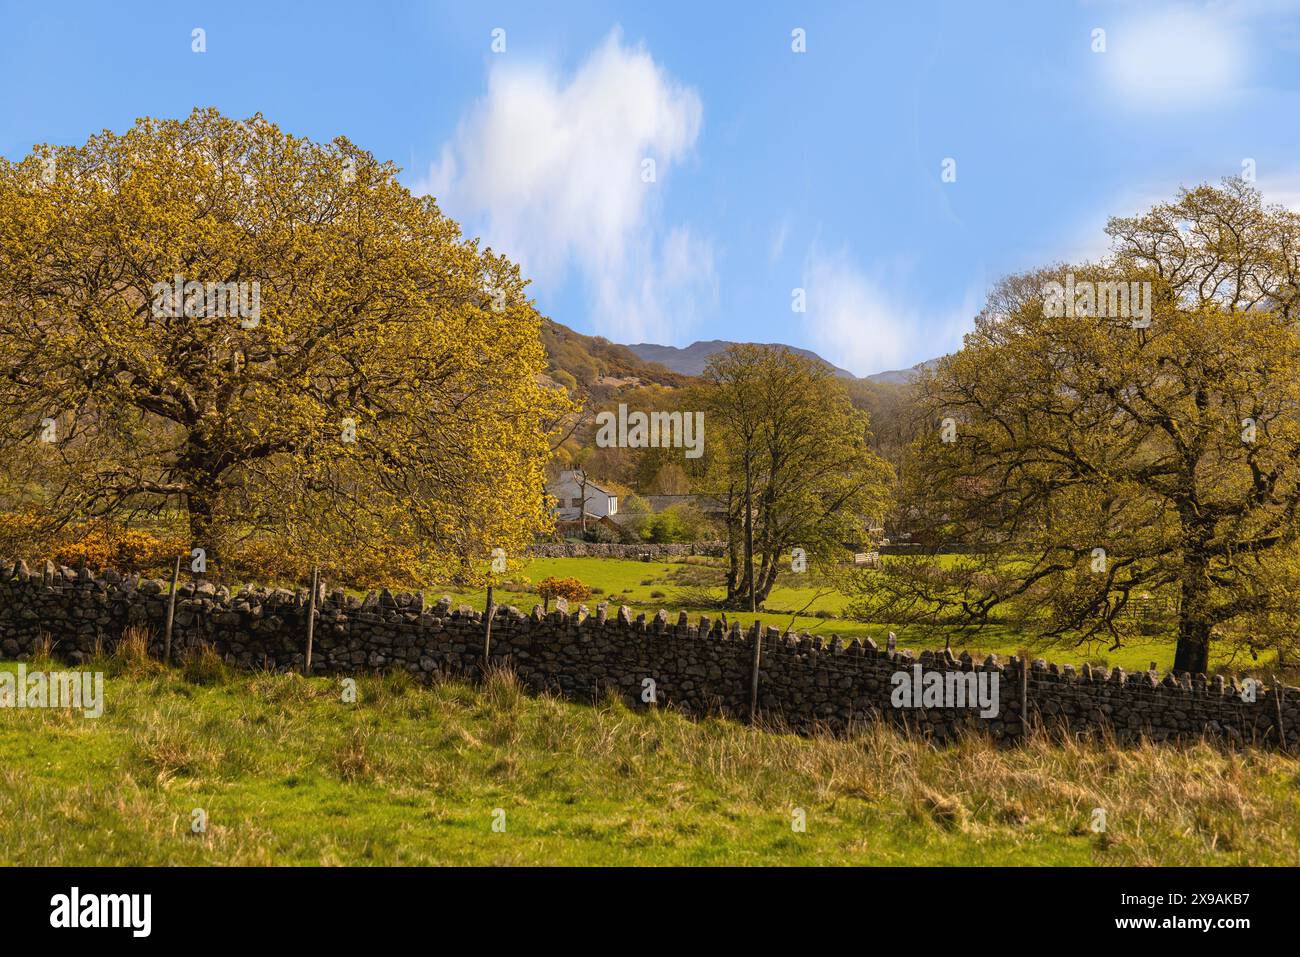 Spring in Eskdale valley, viewed from the Ravenglass and Eskdale Railway in the Lake District National Park, Cumbria, England, United Kingdom. Stock Photo